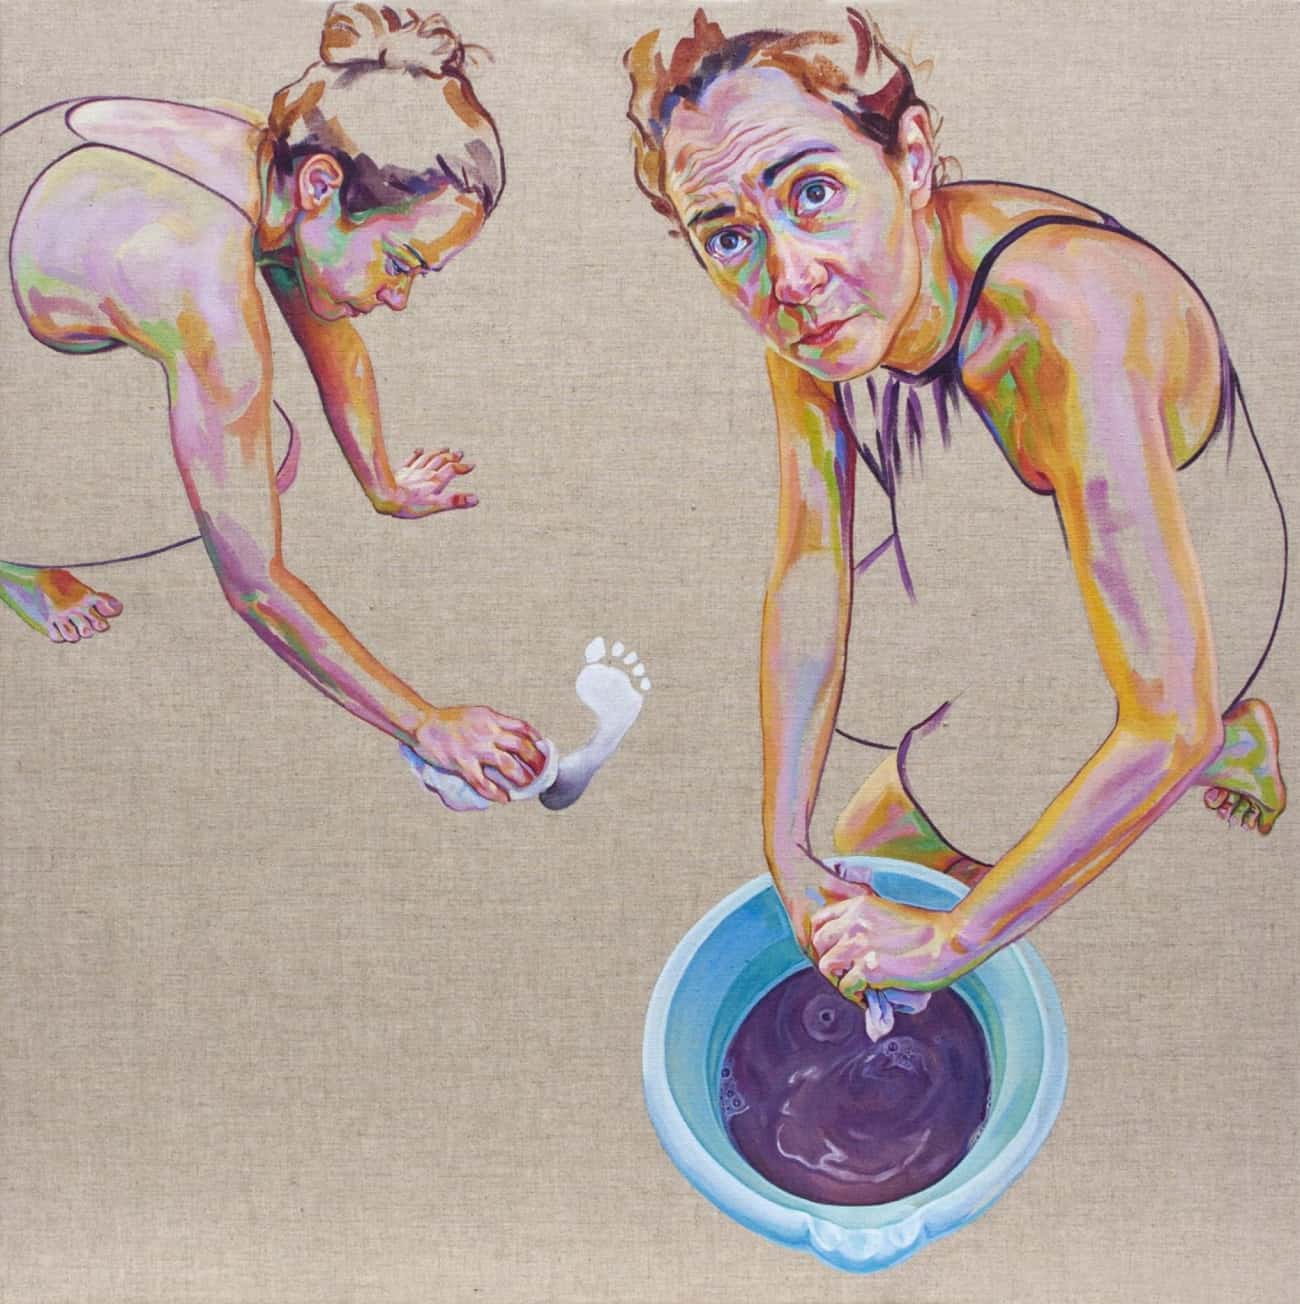 Painting self-portrait: shows one "self" cleaning a footprint from the floor, while another "self" wrings out a wet cloth and looks upwards and out of the canvas.